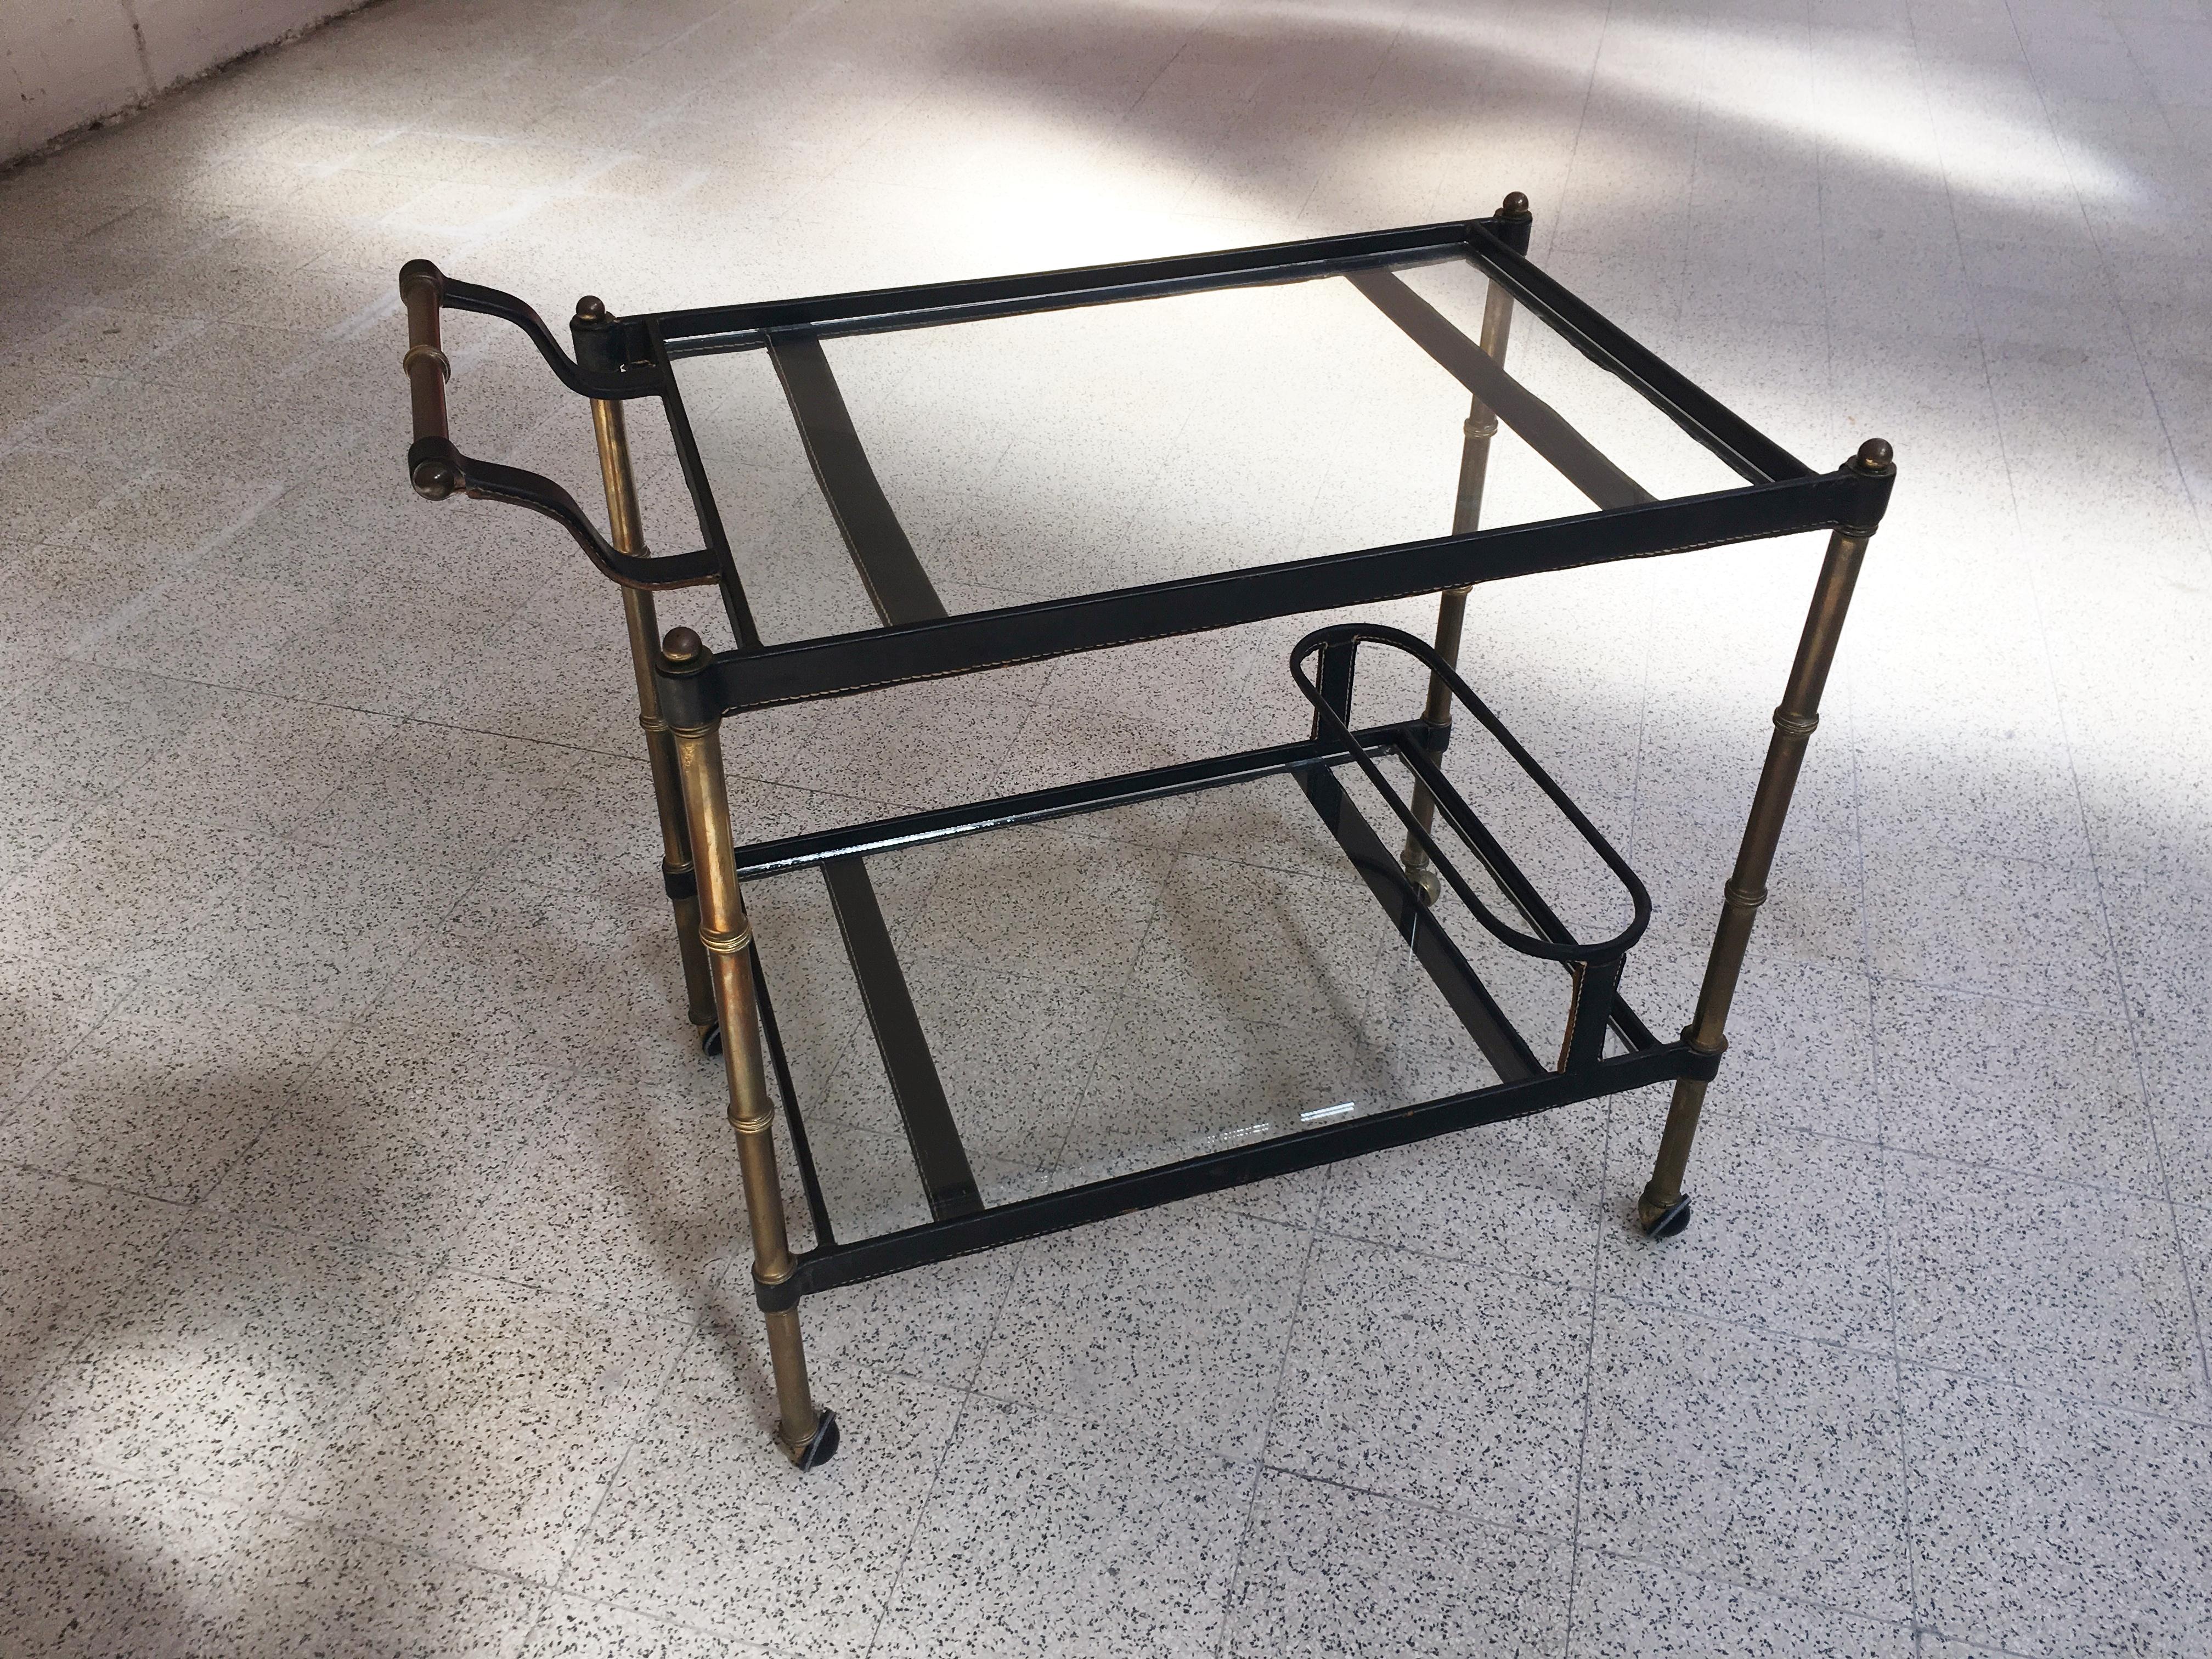 1950s stitched leather bar cart by Jacques Adnet.